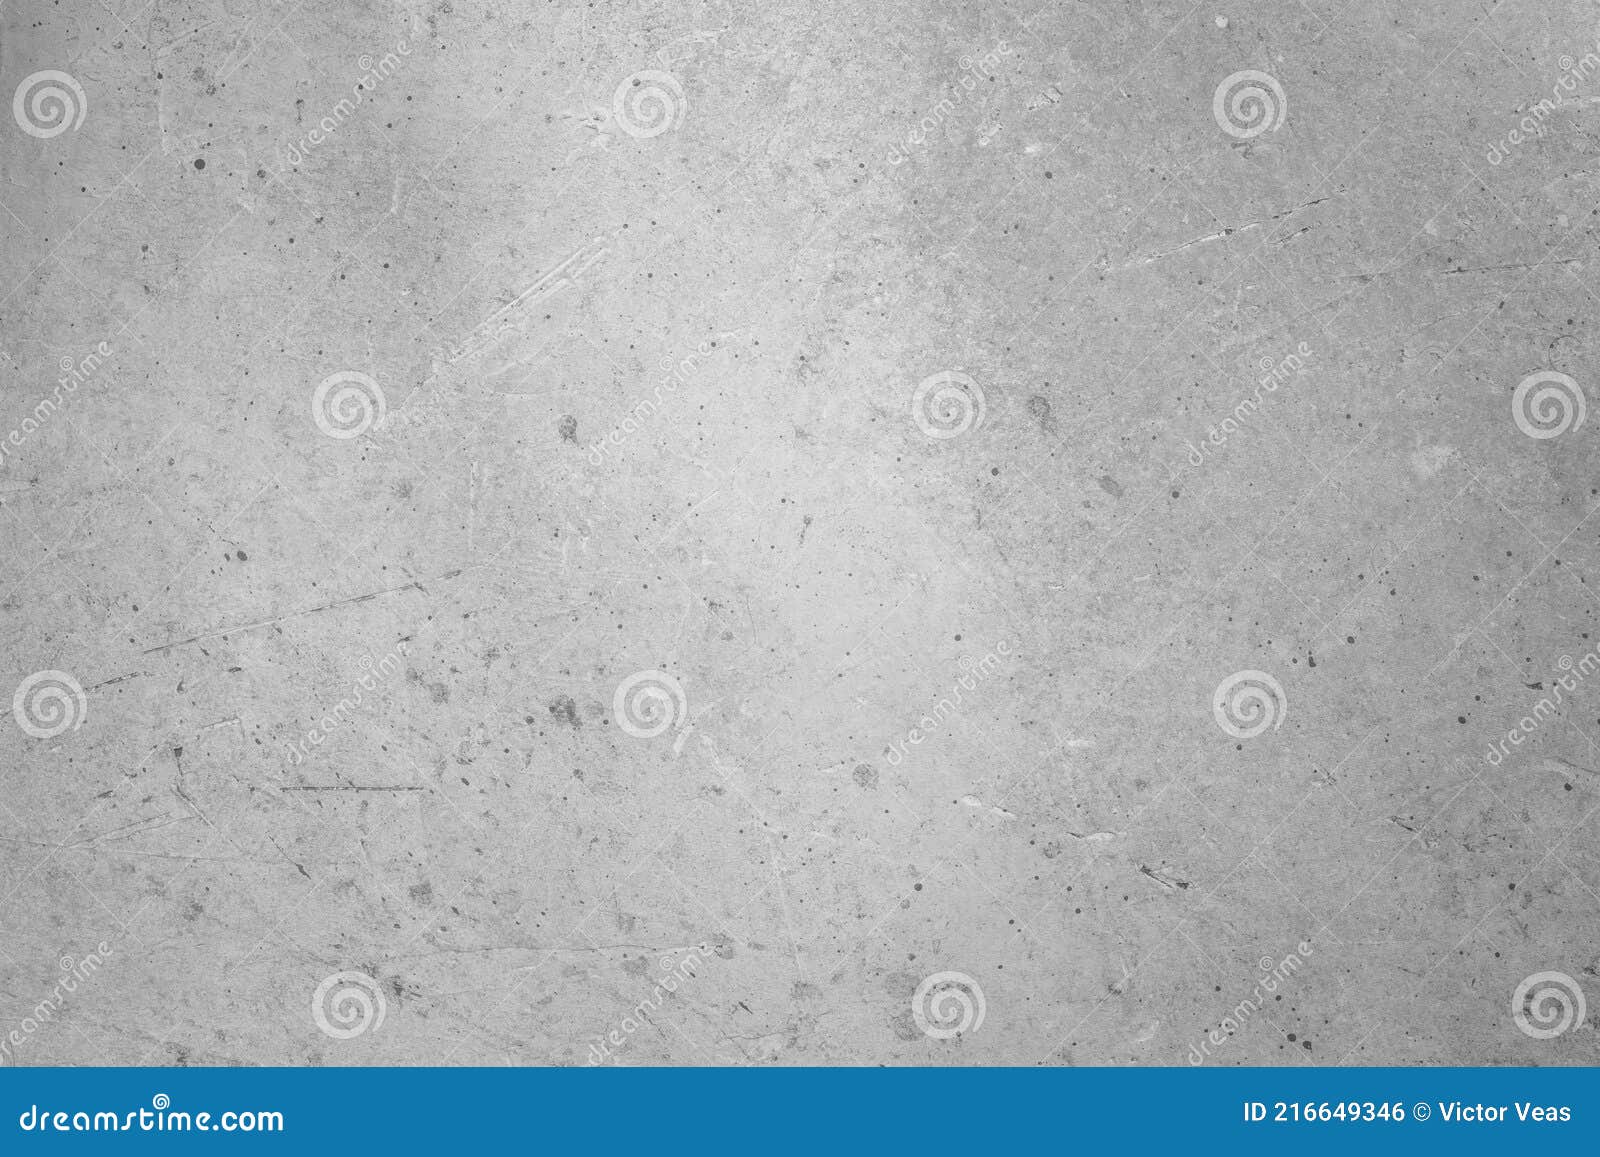 white textured background surface for digital s.